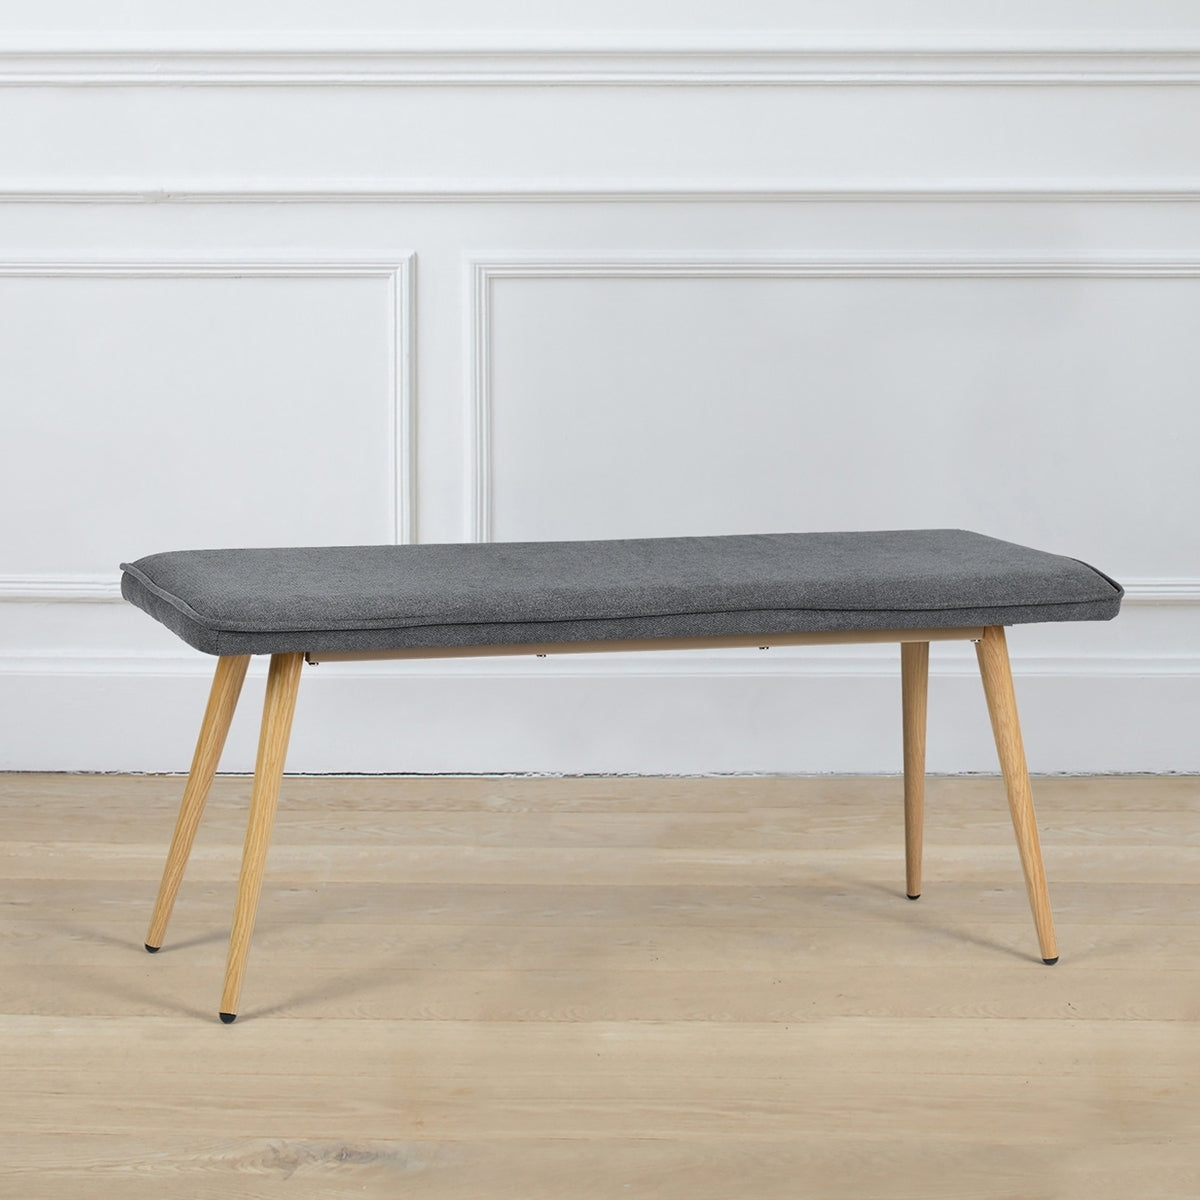 45.3" Dining Room Bench with Metal Legs - CHARCOAL